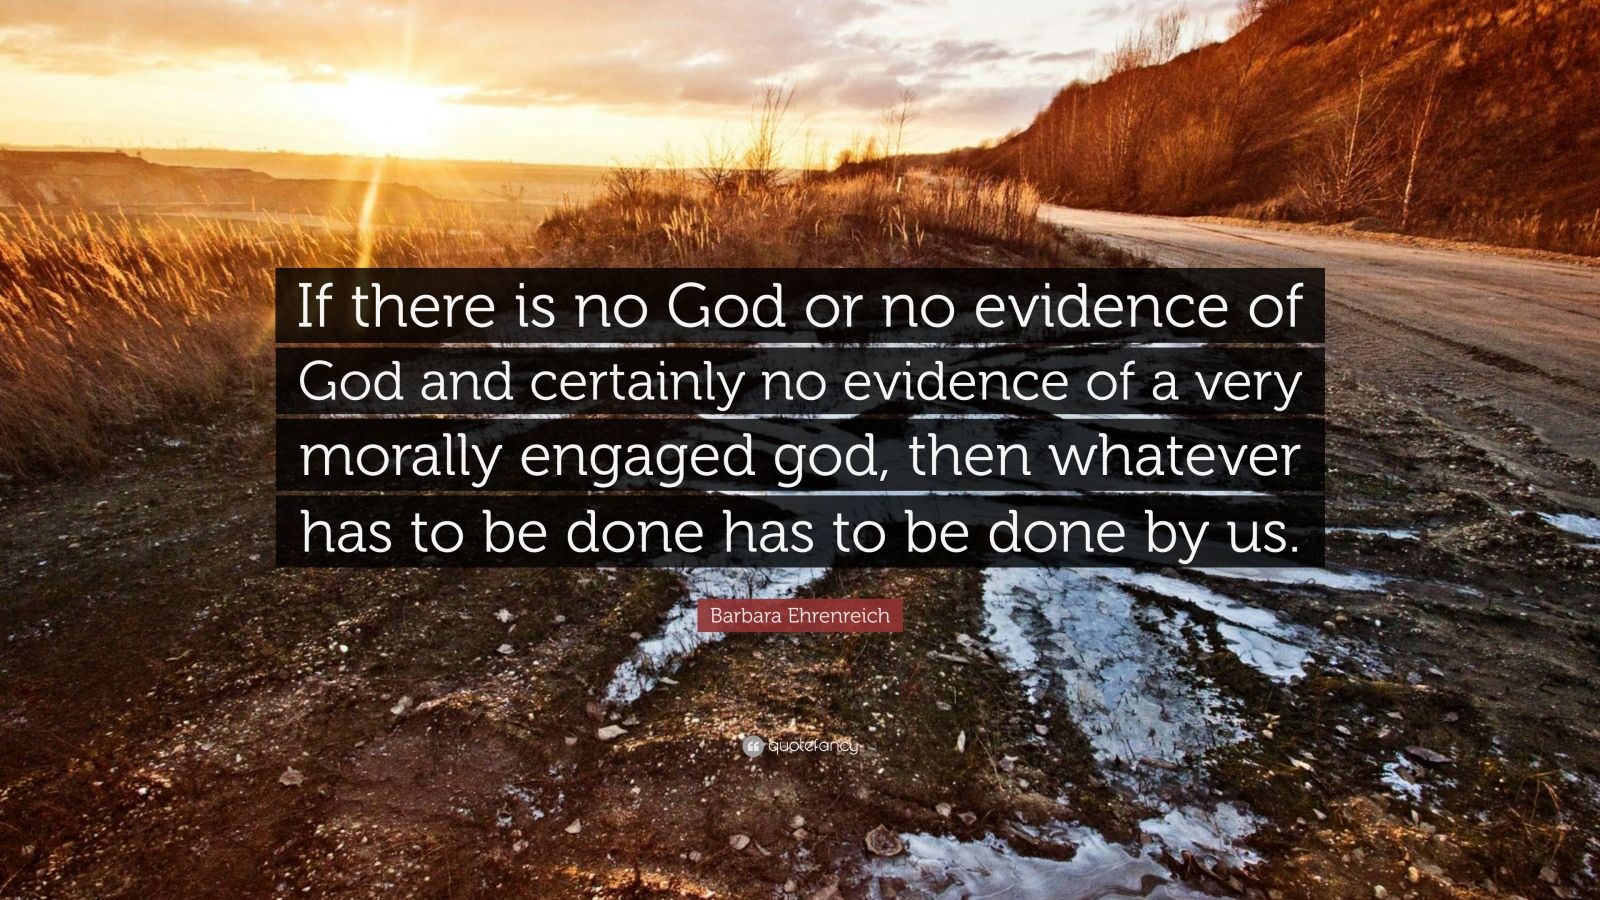 Barbara Ehrenreich Quote: “If there is no God or no evidence of God and ...